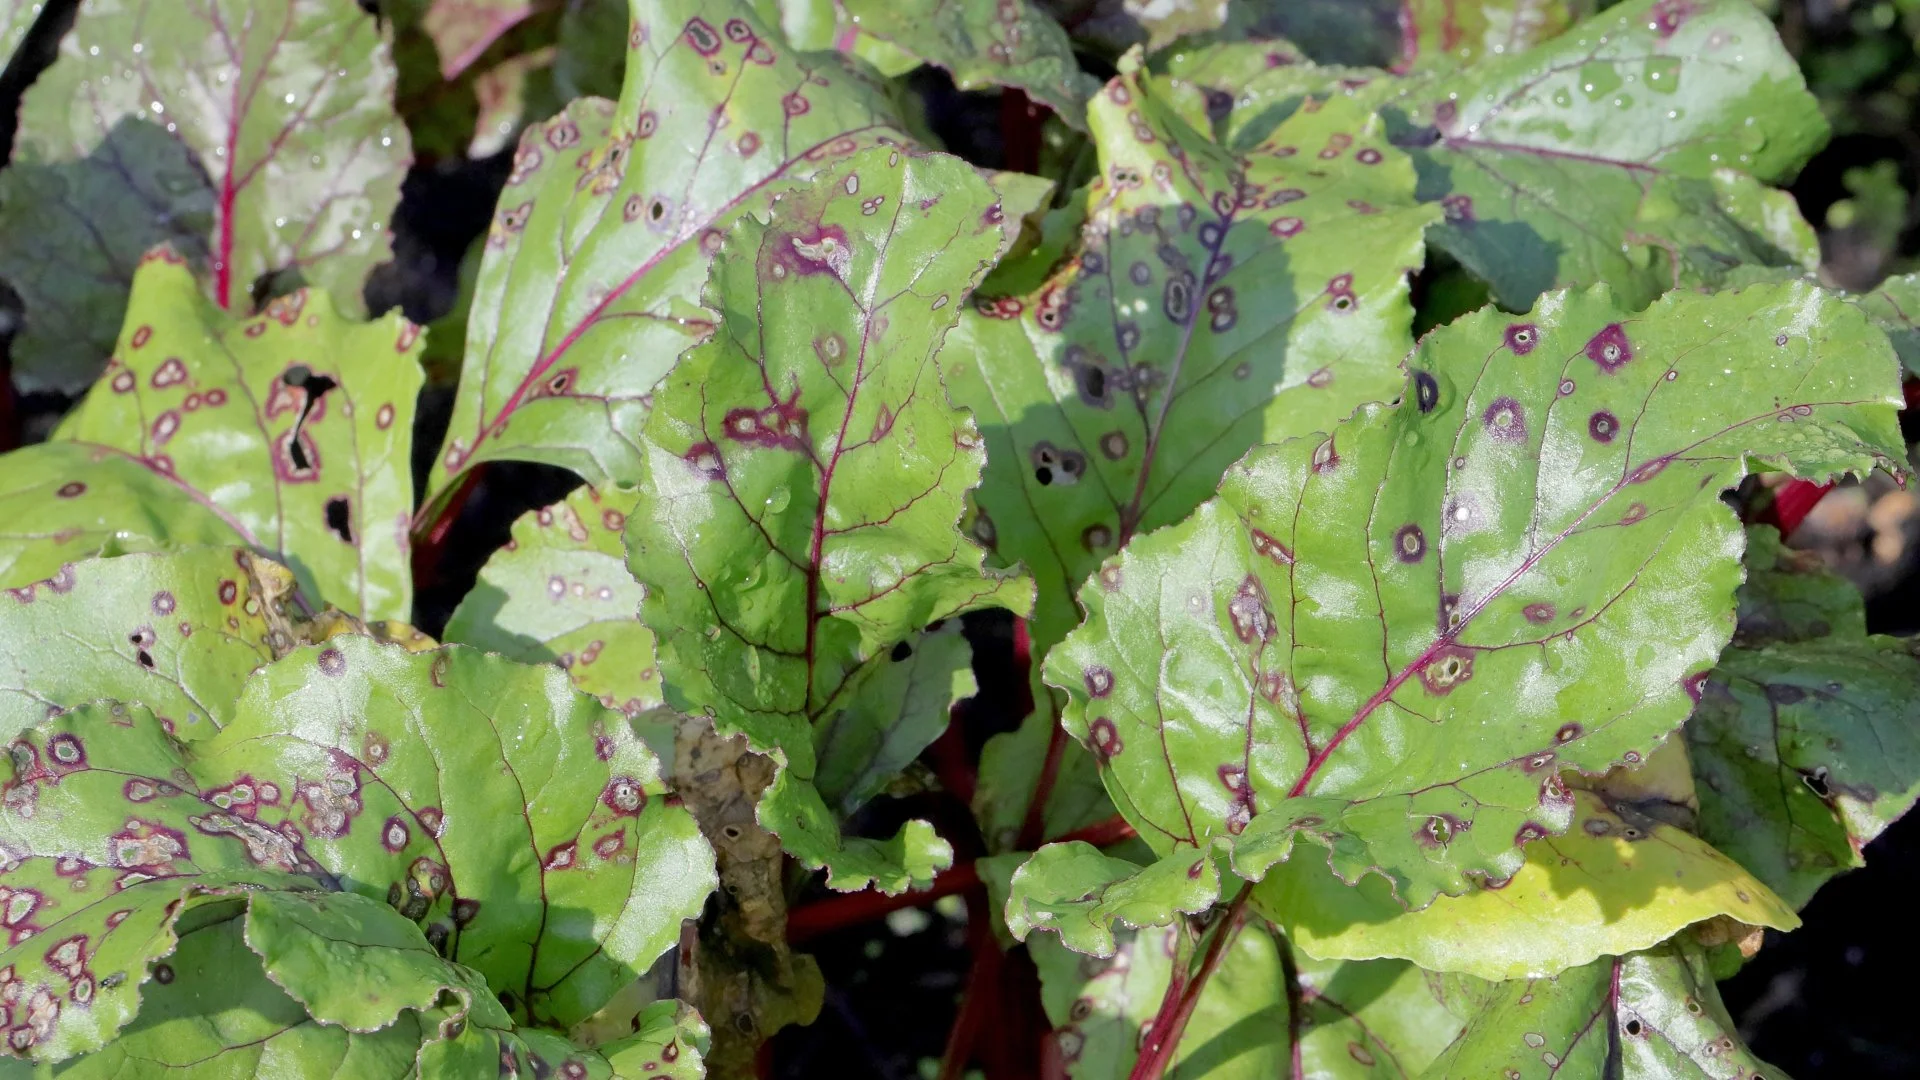 Are There Brown Spots on Your Shrubs' Foliage? It Could Be Leaf Spot!